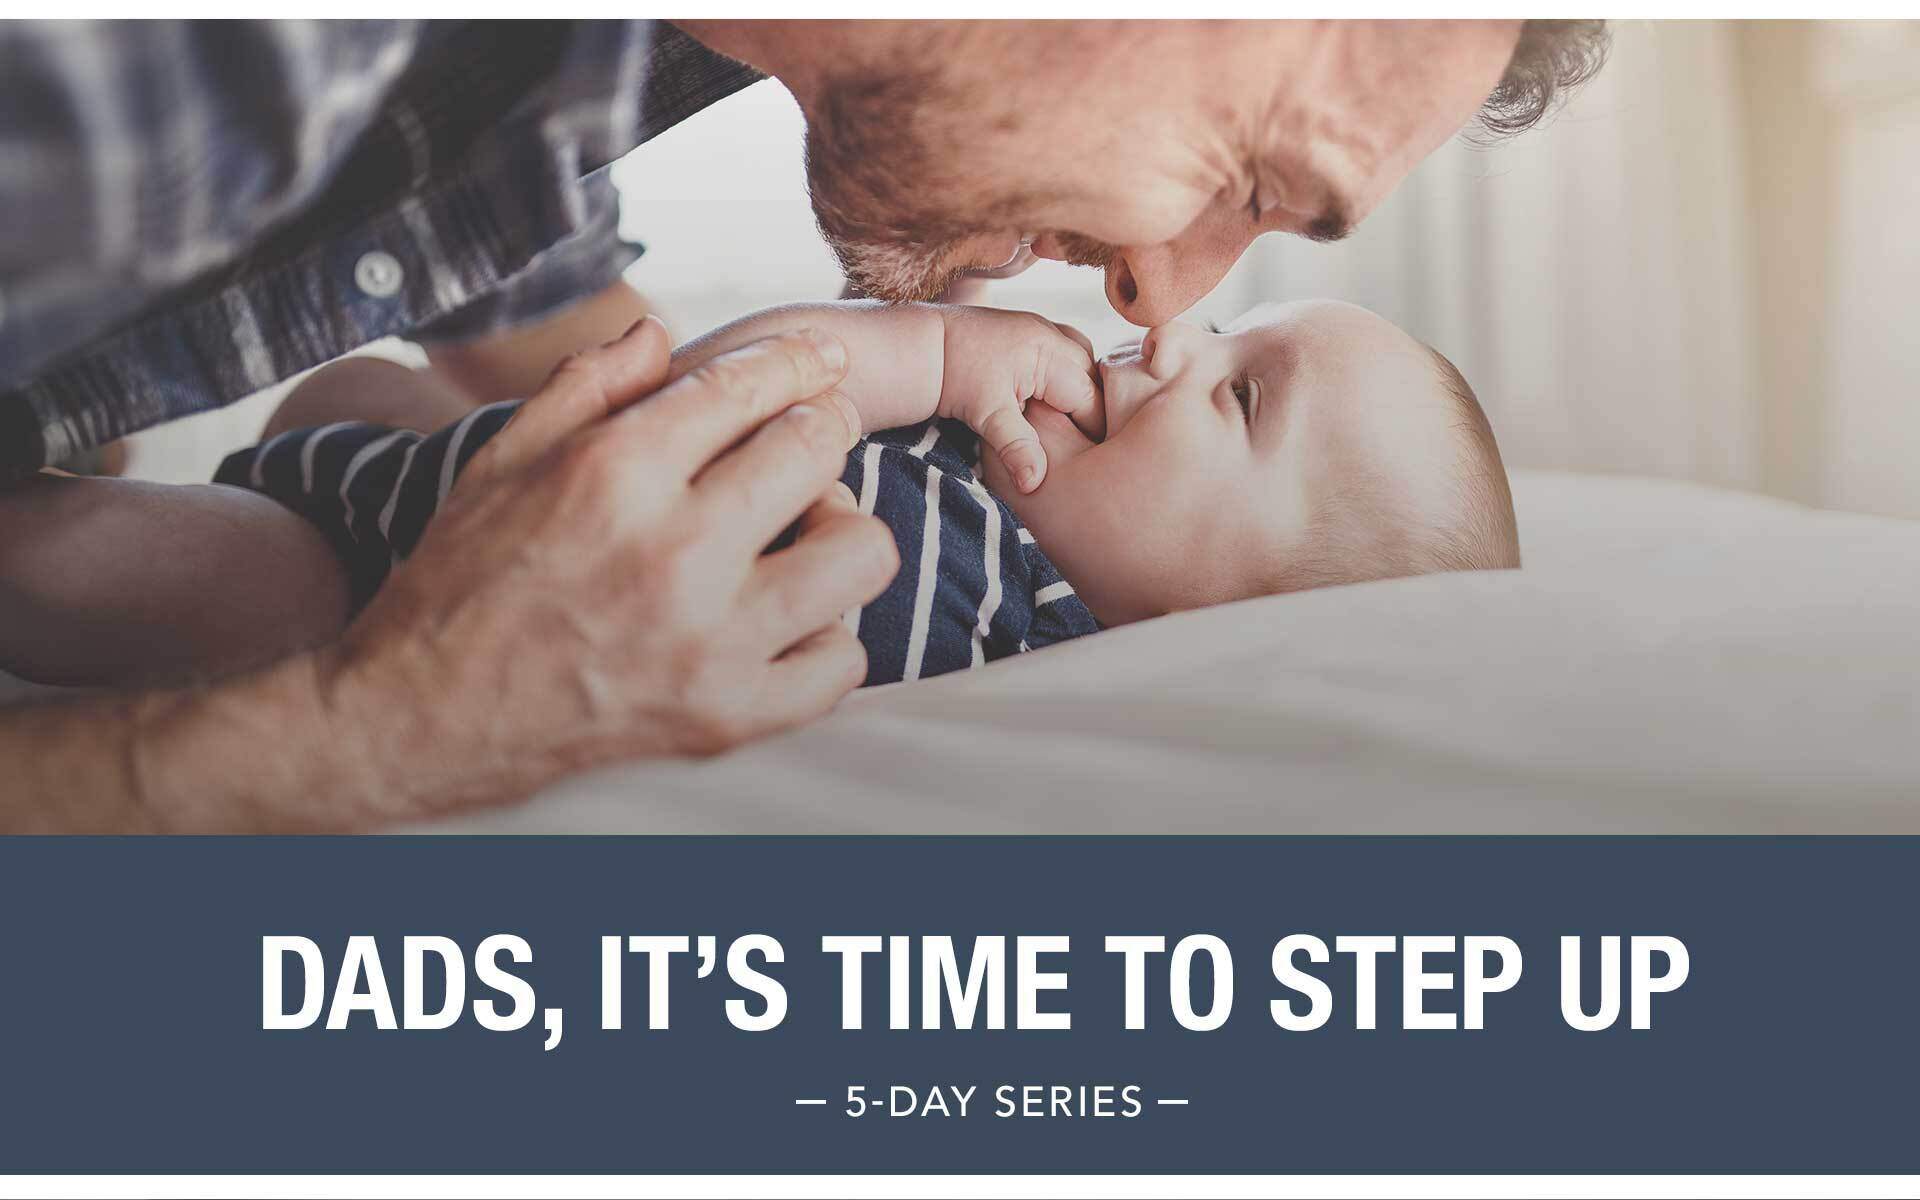 Dads, It’s Time to Step Up!